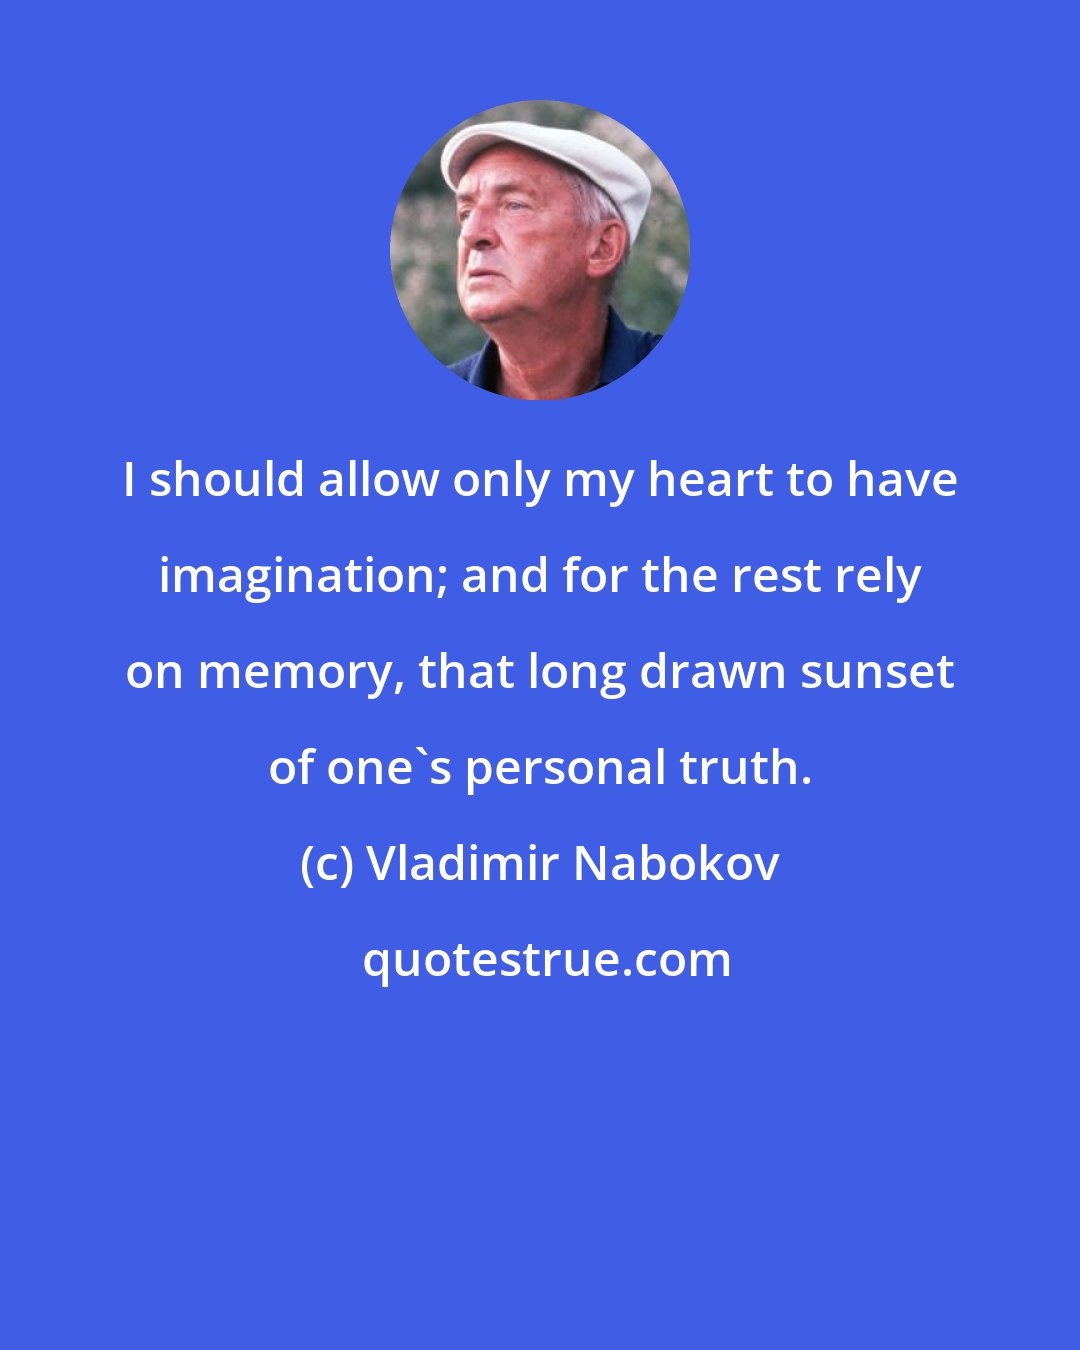 Vladimir Nabokov: I should allow only my heart to have imagination; and for the rest rely on memory, that long drawn sunset of one's personal truth.